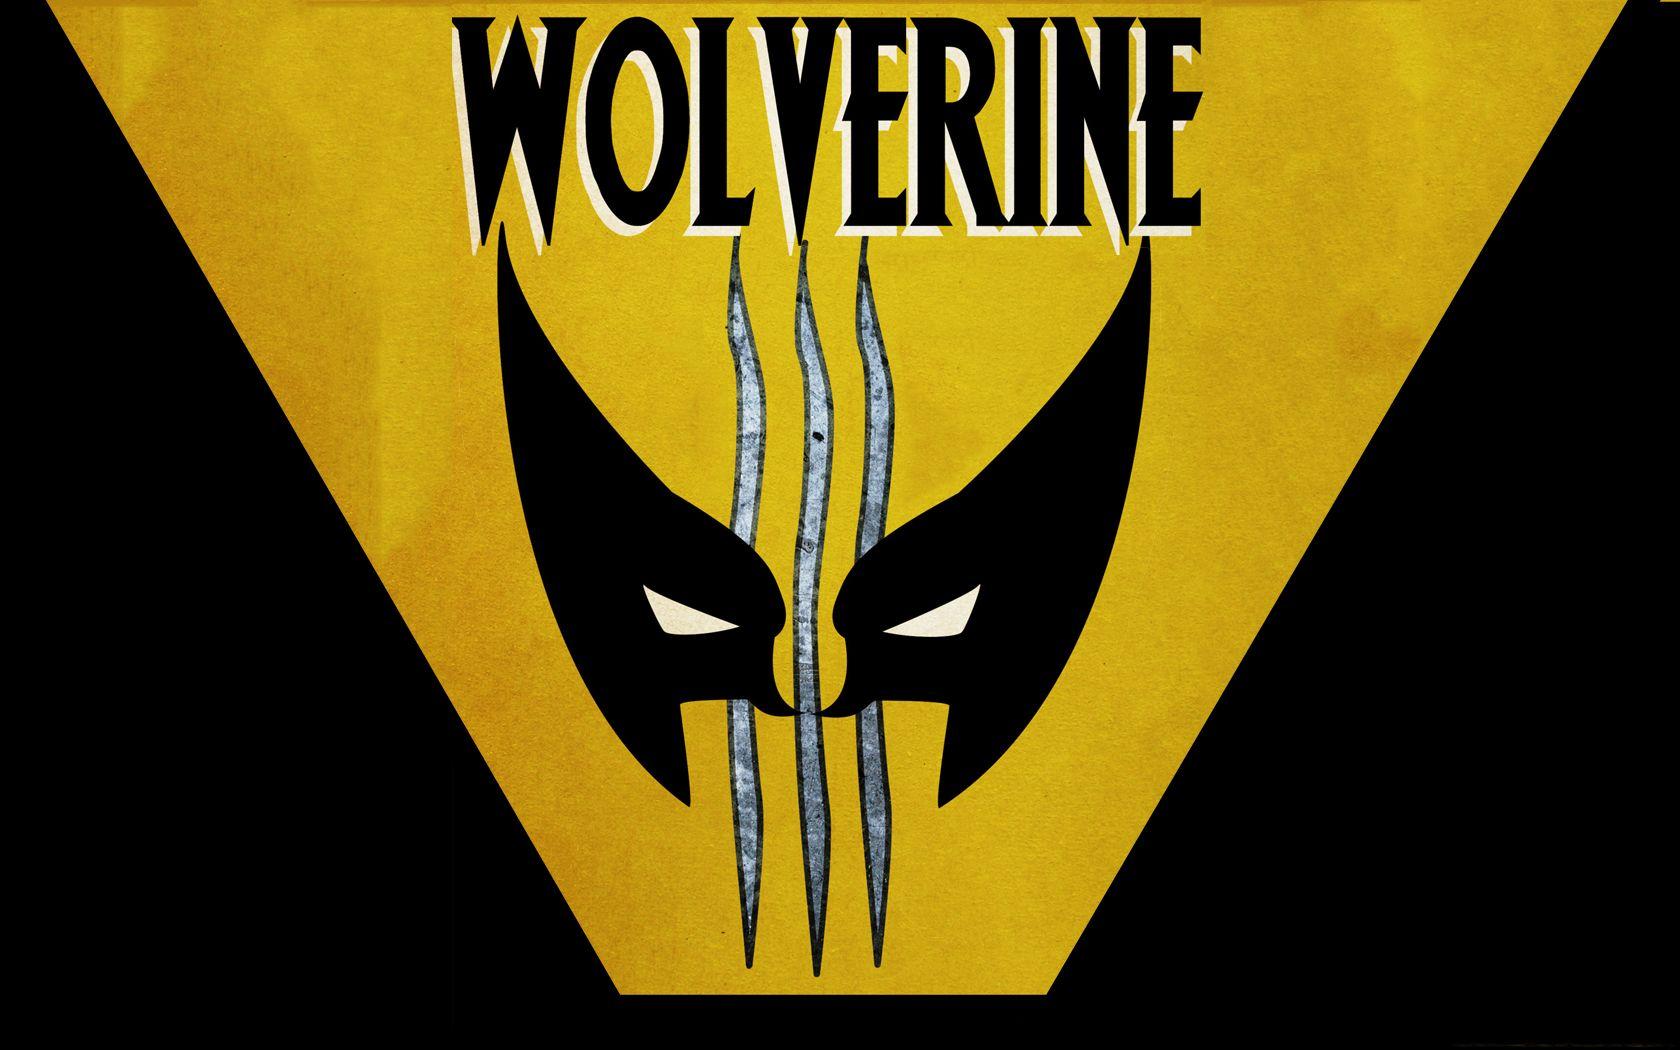 Marvel Wolverine Logo - Wolverine Wallpaper and Background Image | 1680x1050 | ID:632708 ...